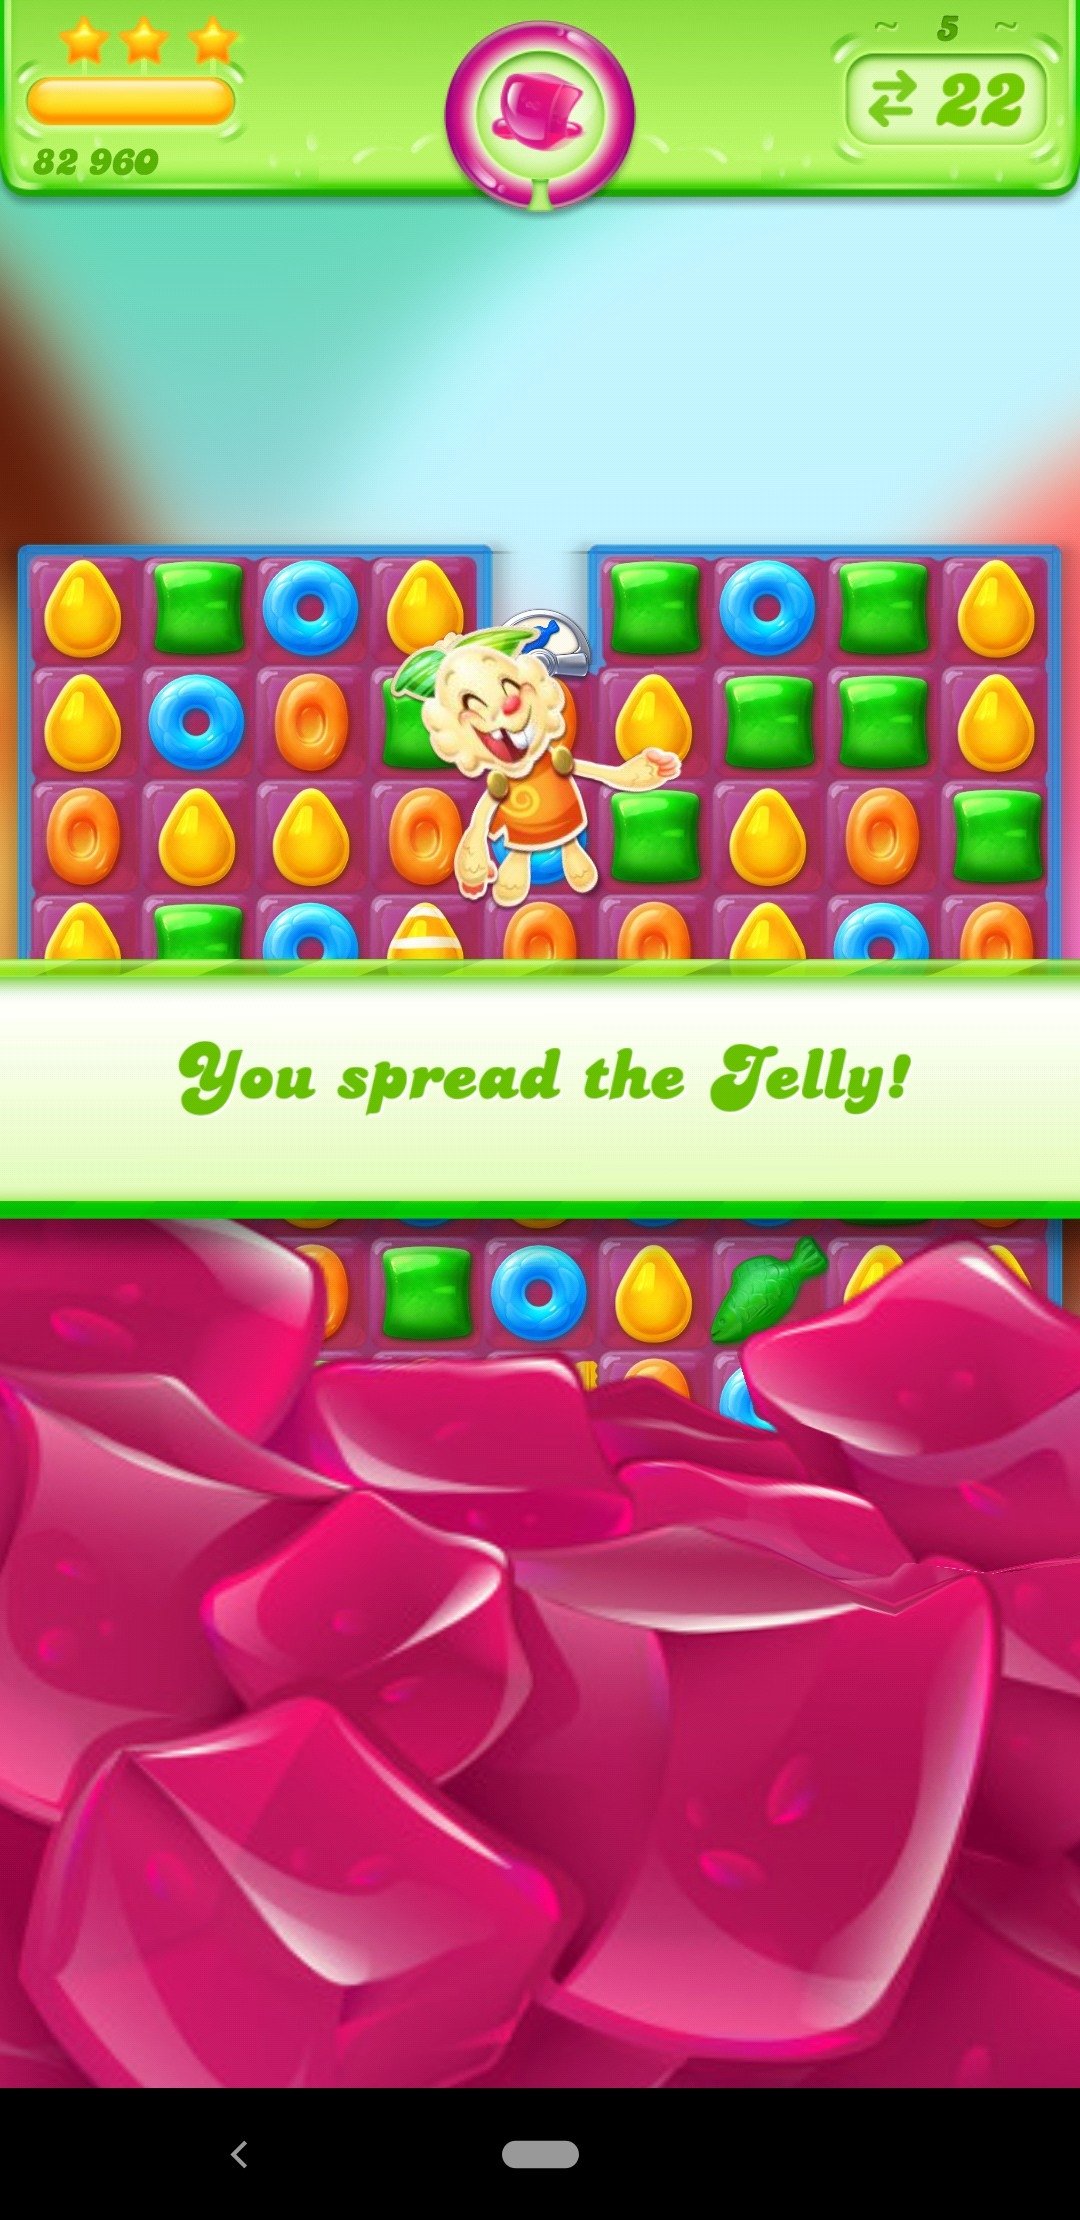 Candy Crush Jelly Saga 3.16.1 APK for Android - Download - AndroidAPKsFree